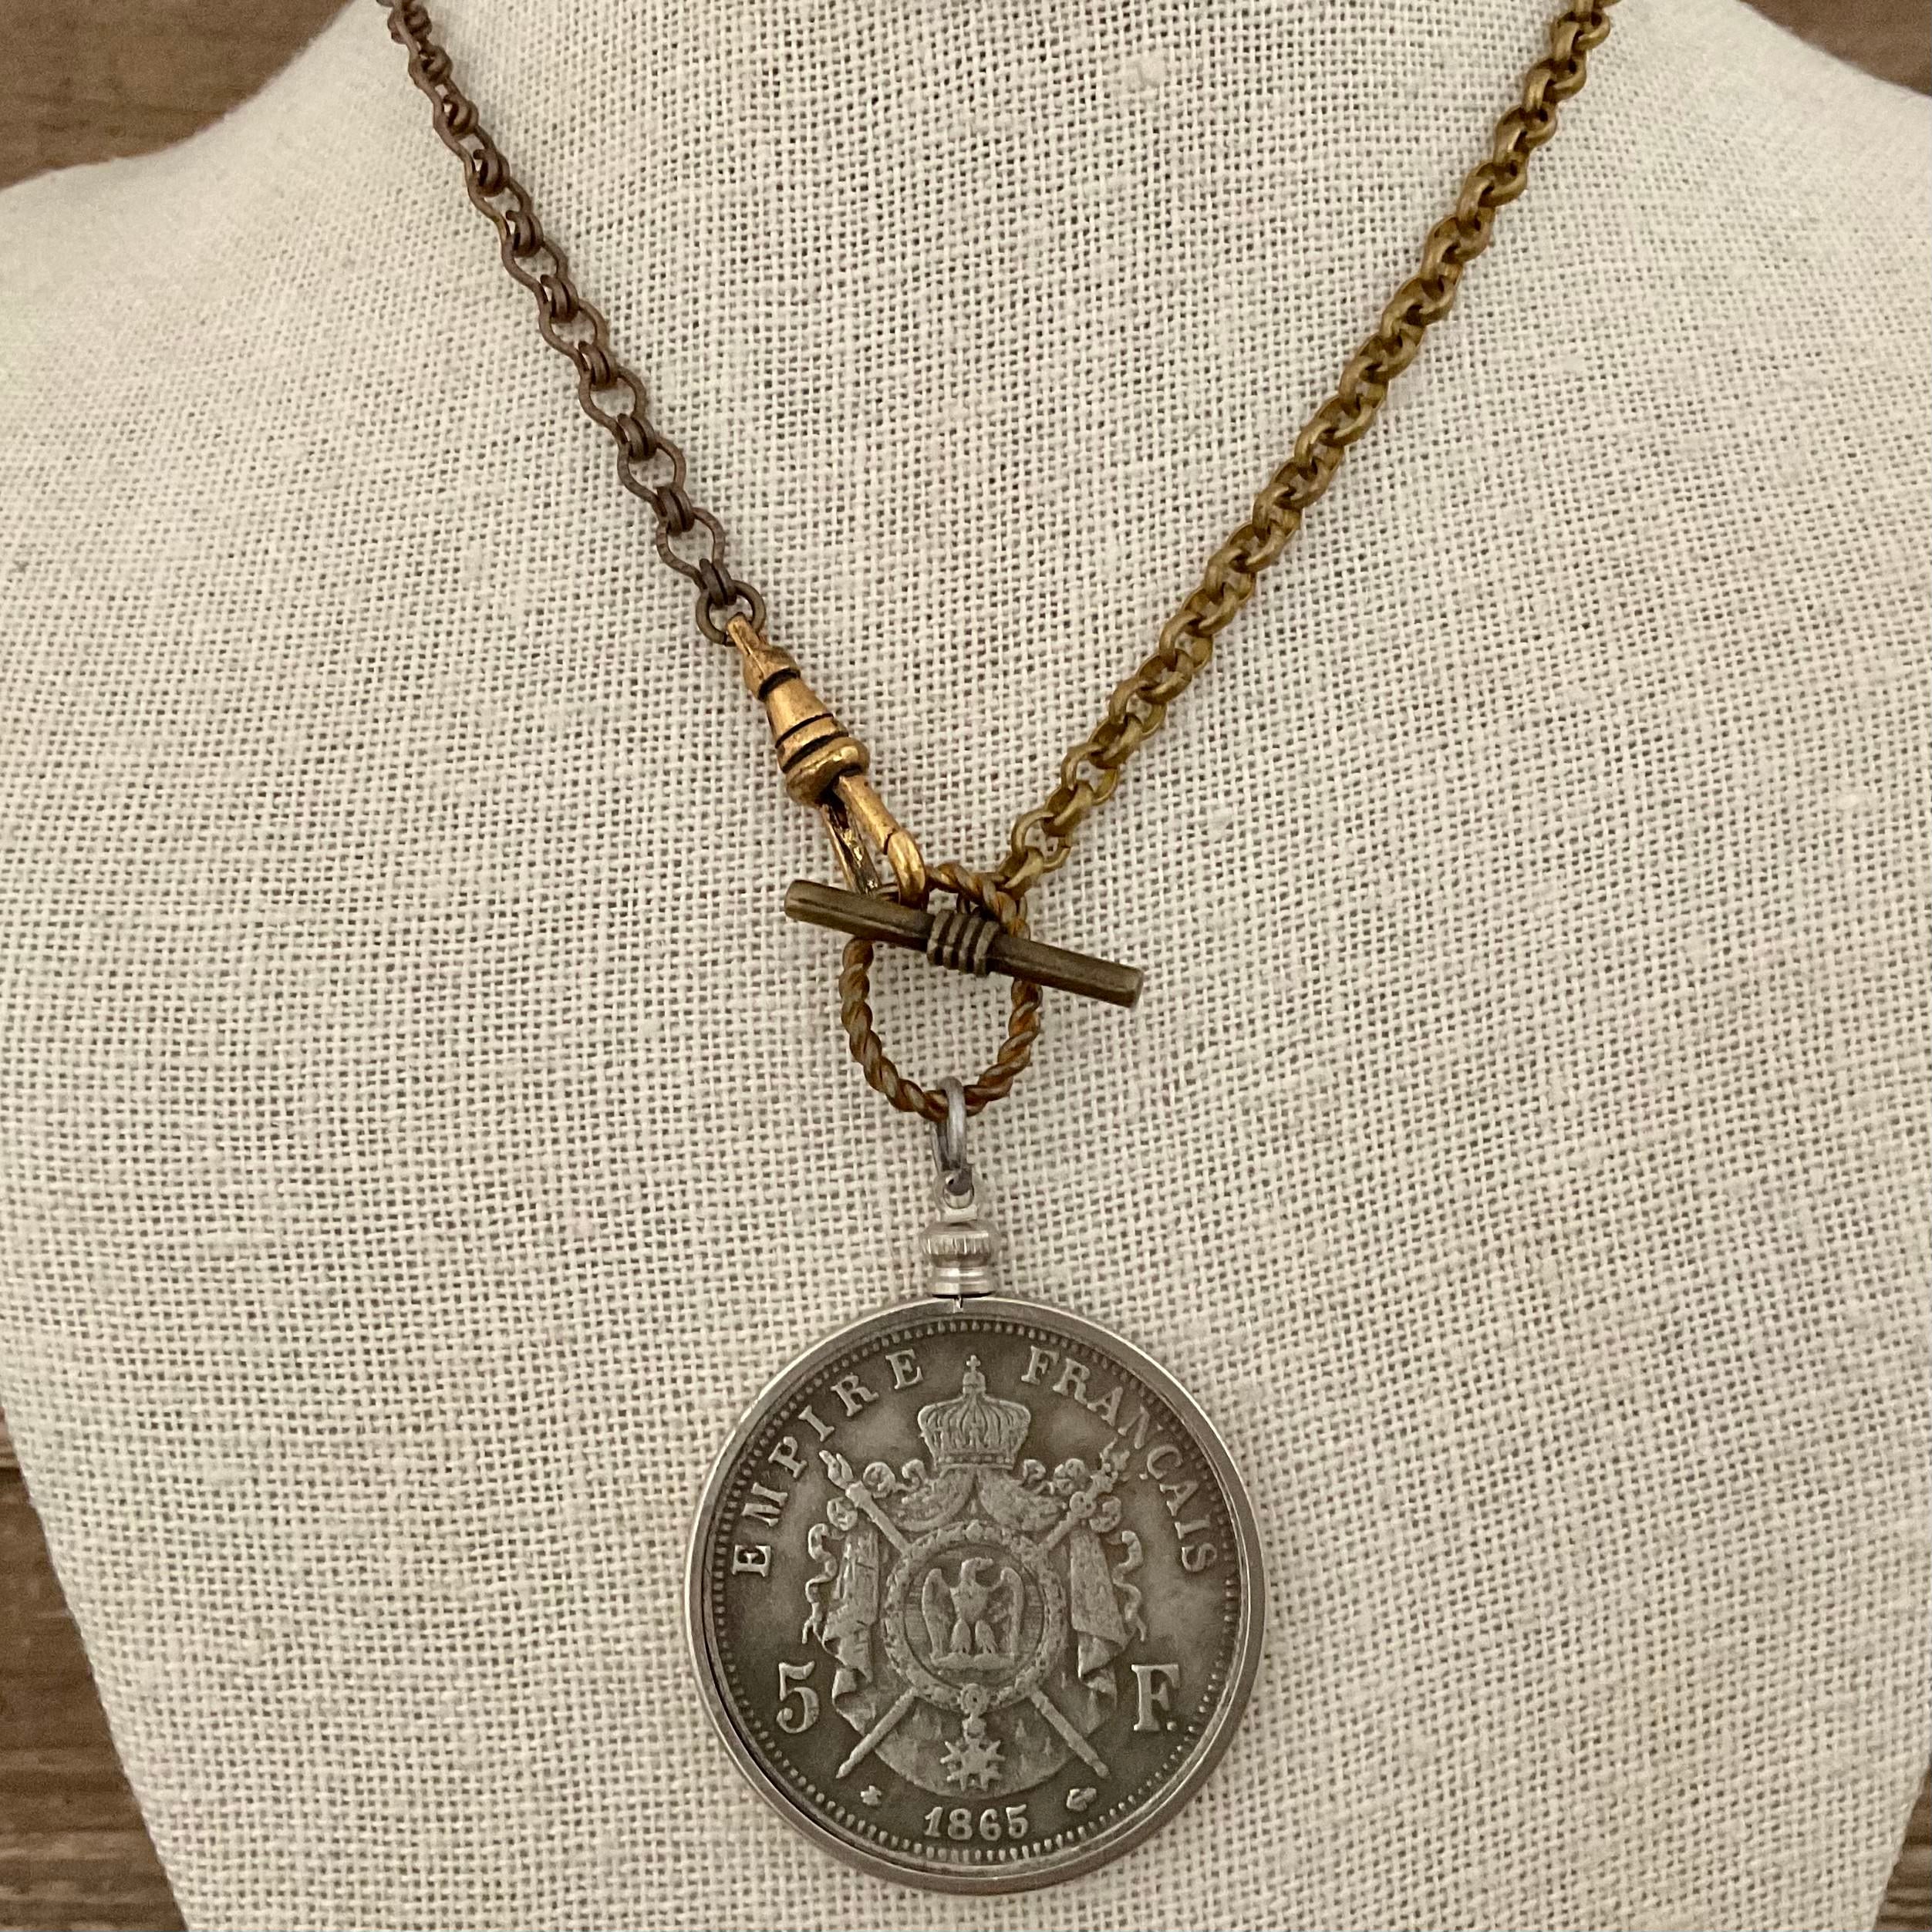 Vintage Brass Chain with Vintage French Coin Circa 1865